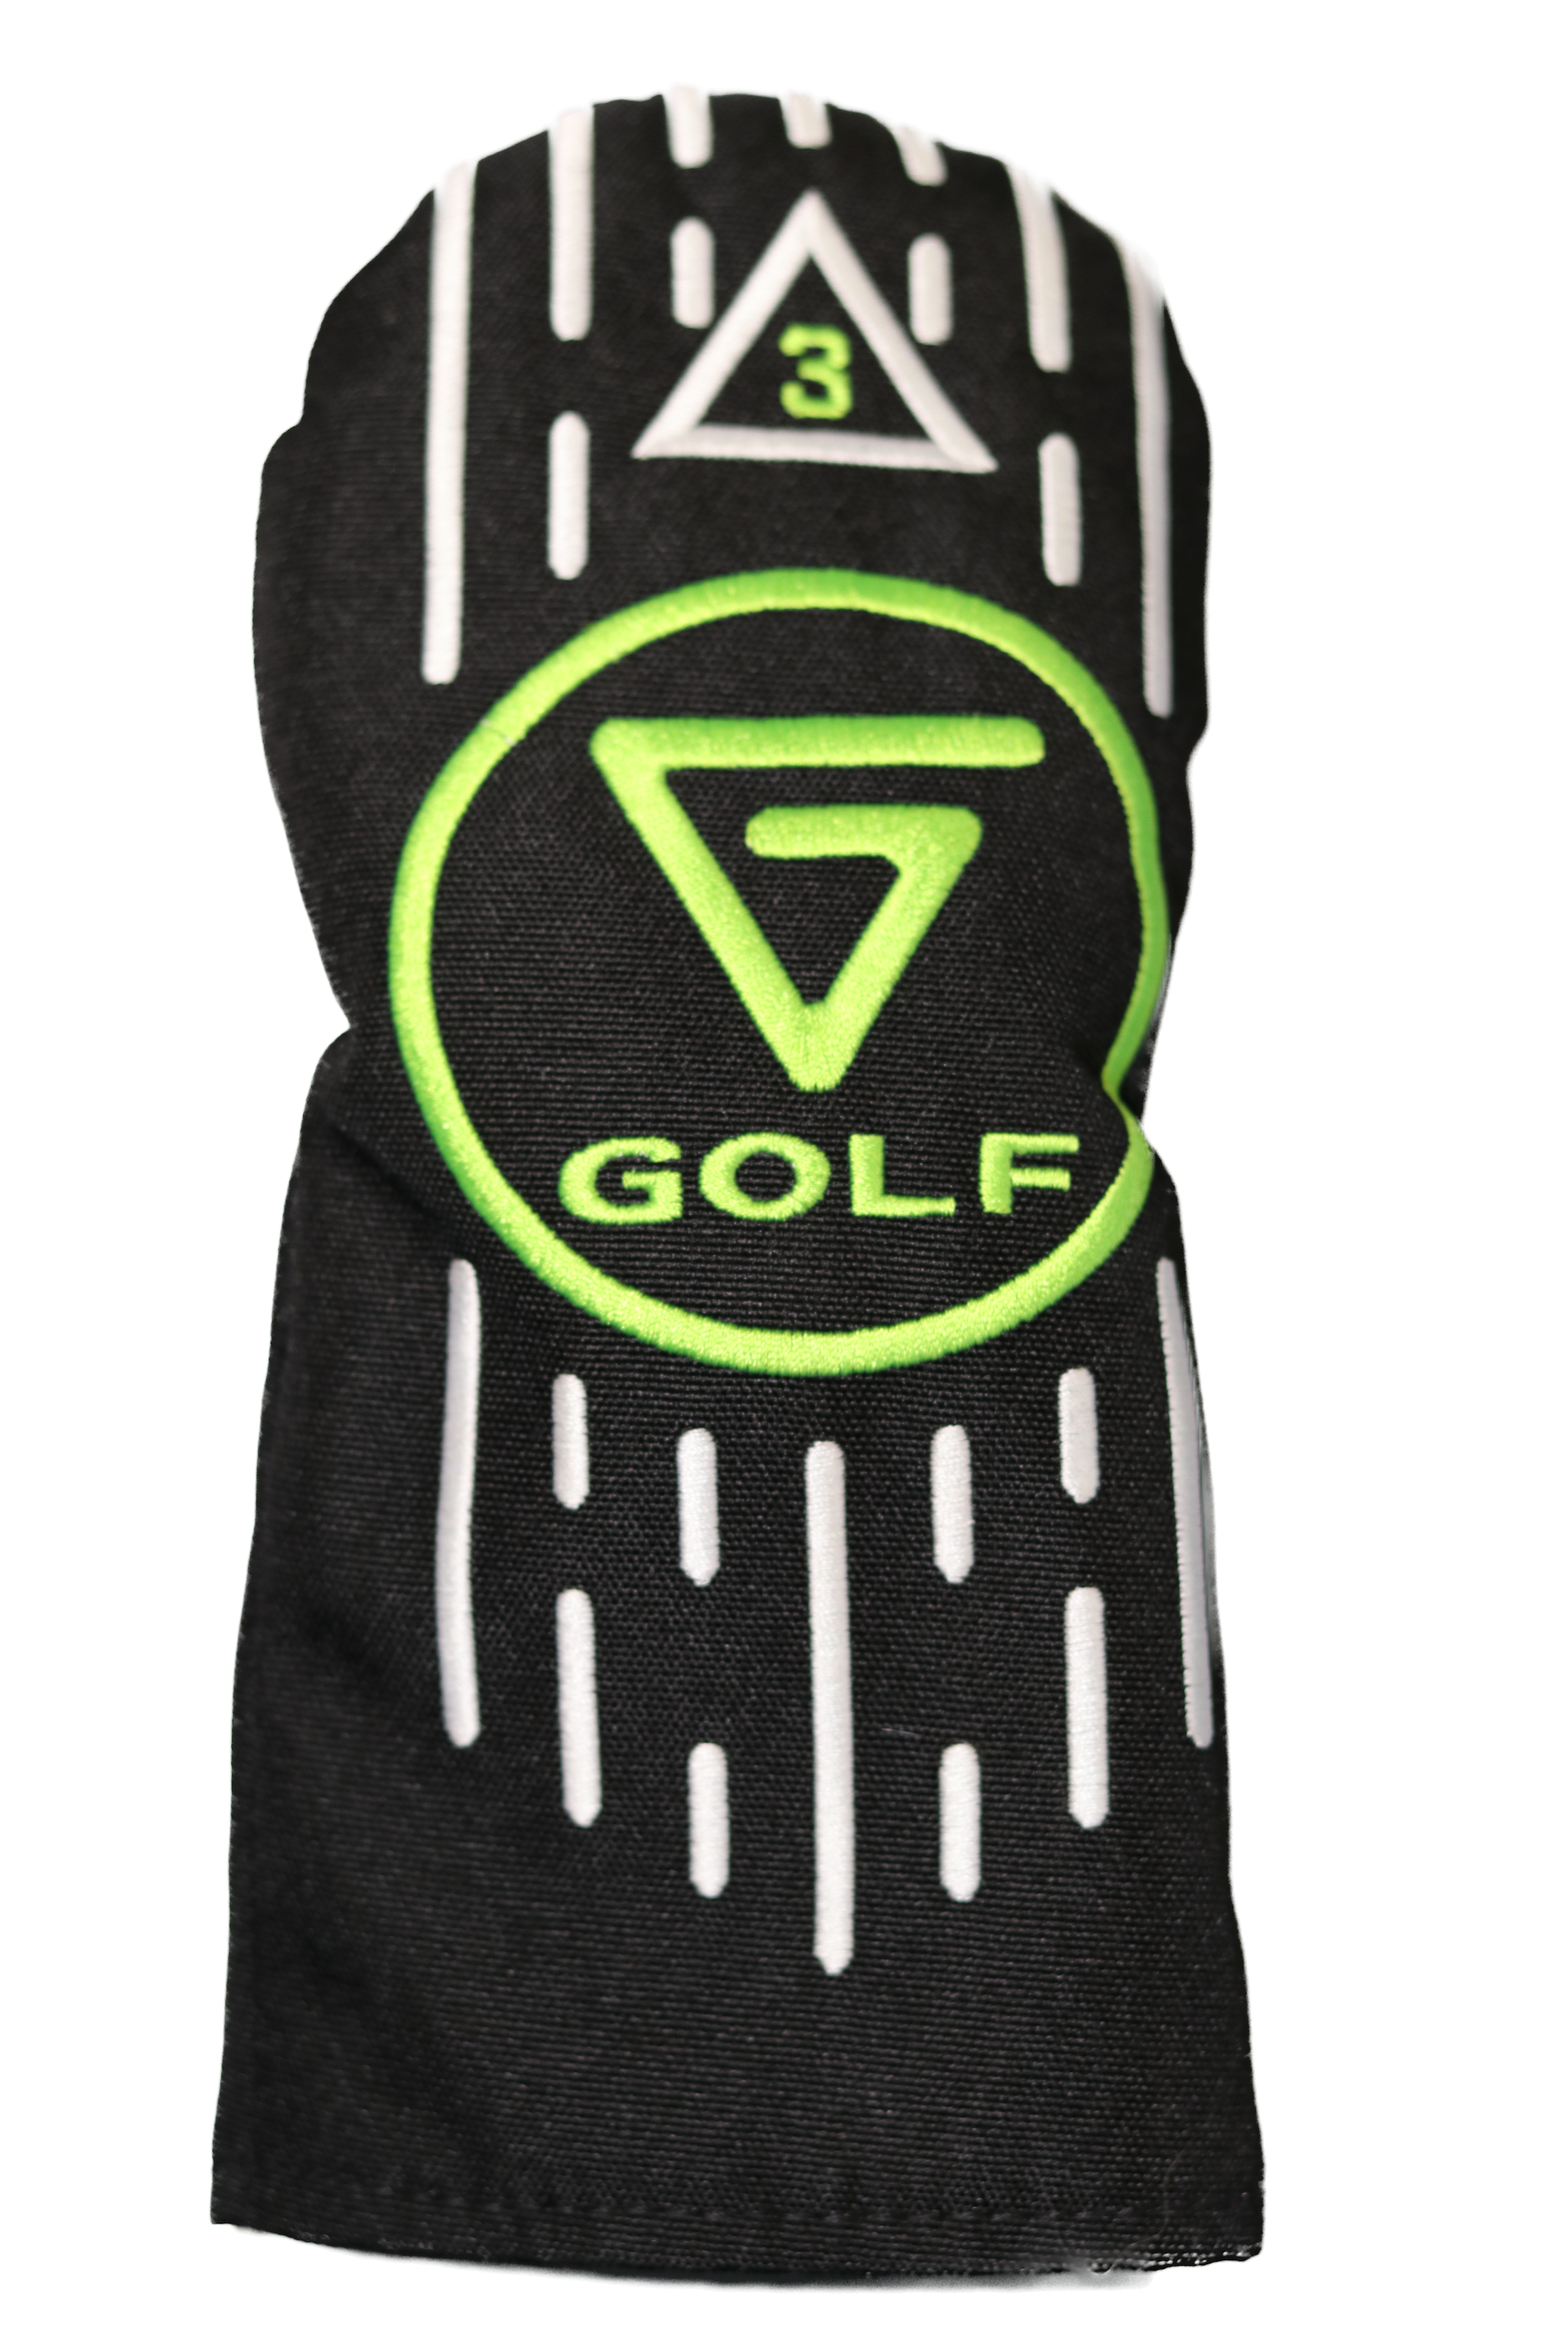 2023 Vertical Groove Golf (VGG) 3-Wood Head Cover